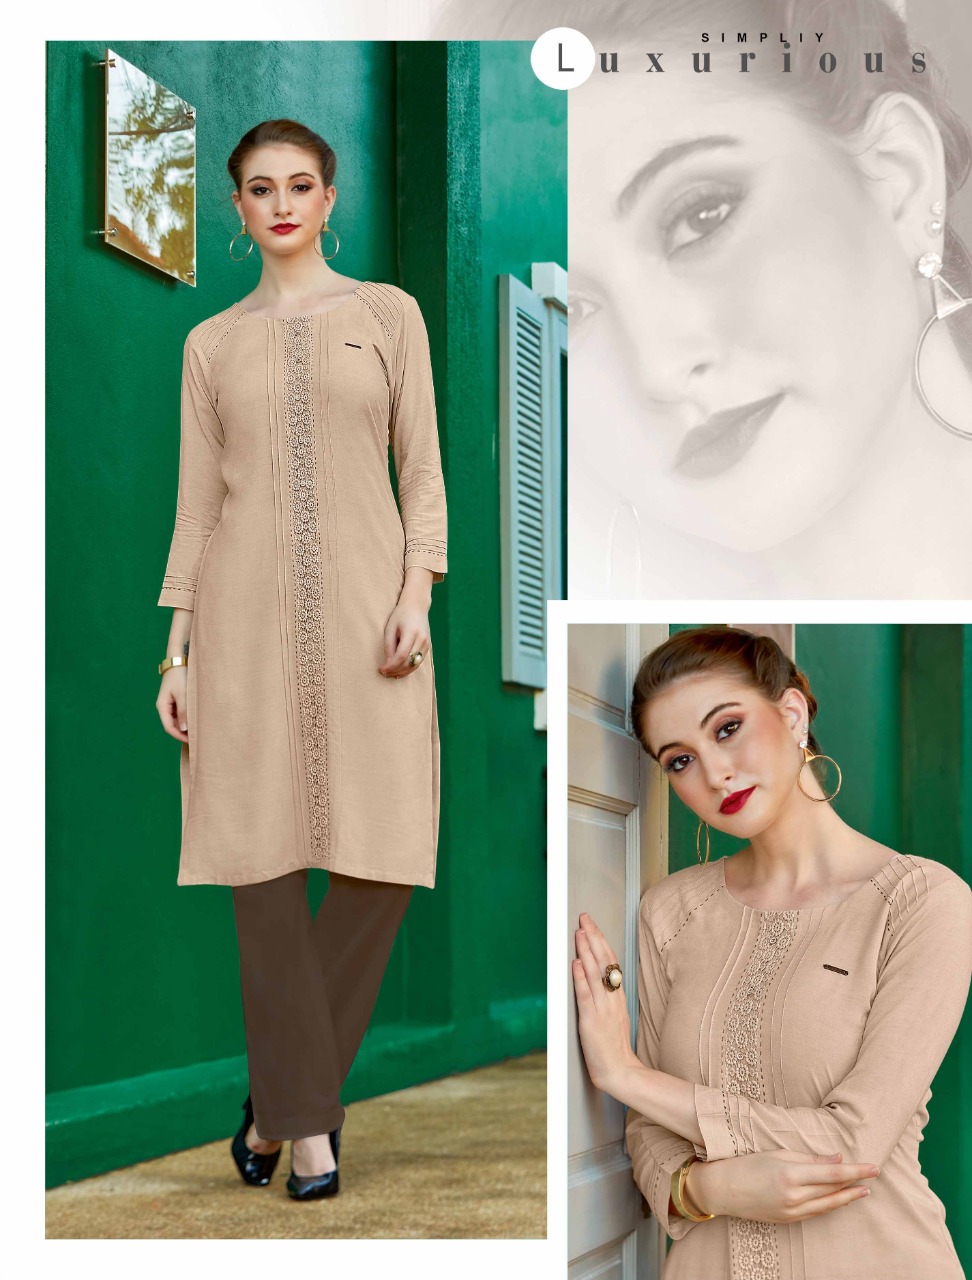 Desire By Lymi Original 2501 To 2508 Series Beautiful Stylish Fancy Colorful Casual Wear & Ethnic Wear & Ready To Wear Rayon Flex Kurtis At Wholesale Price